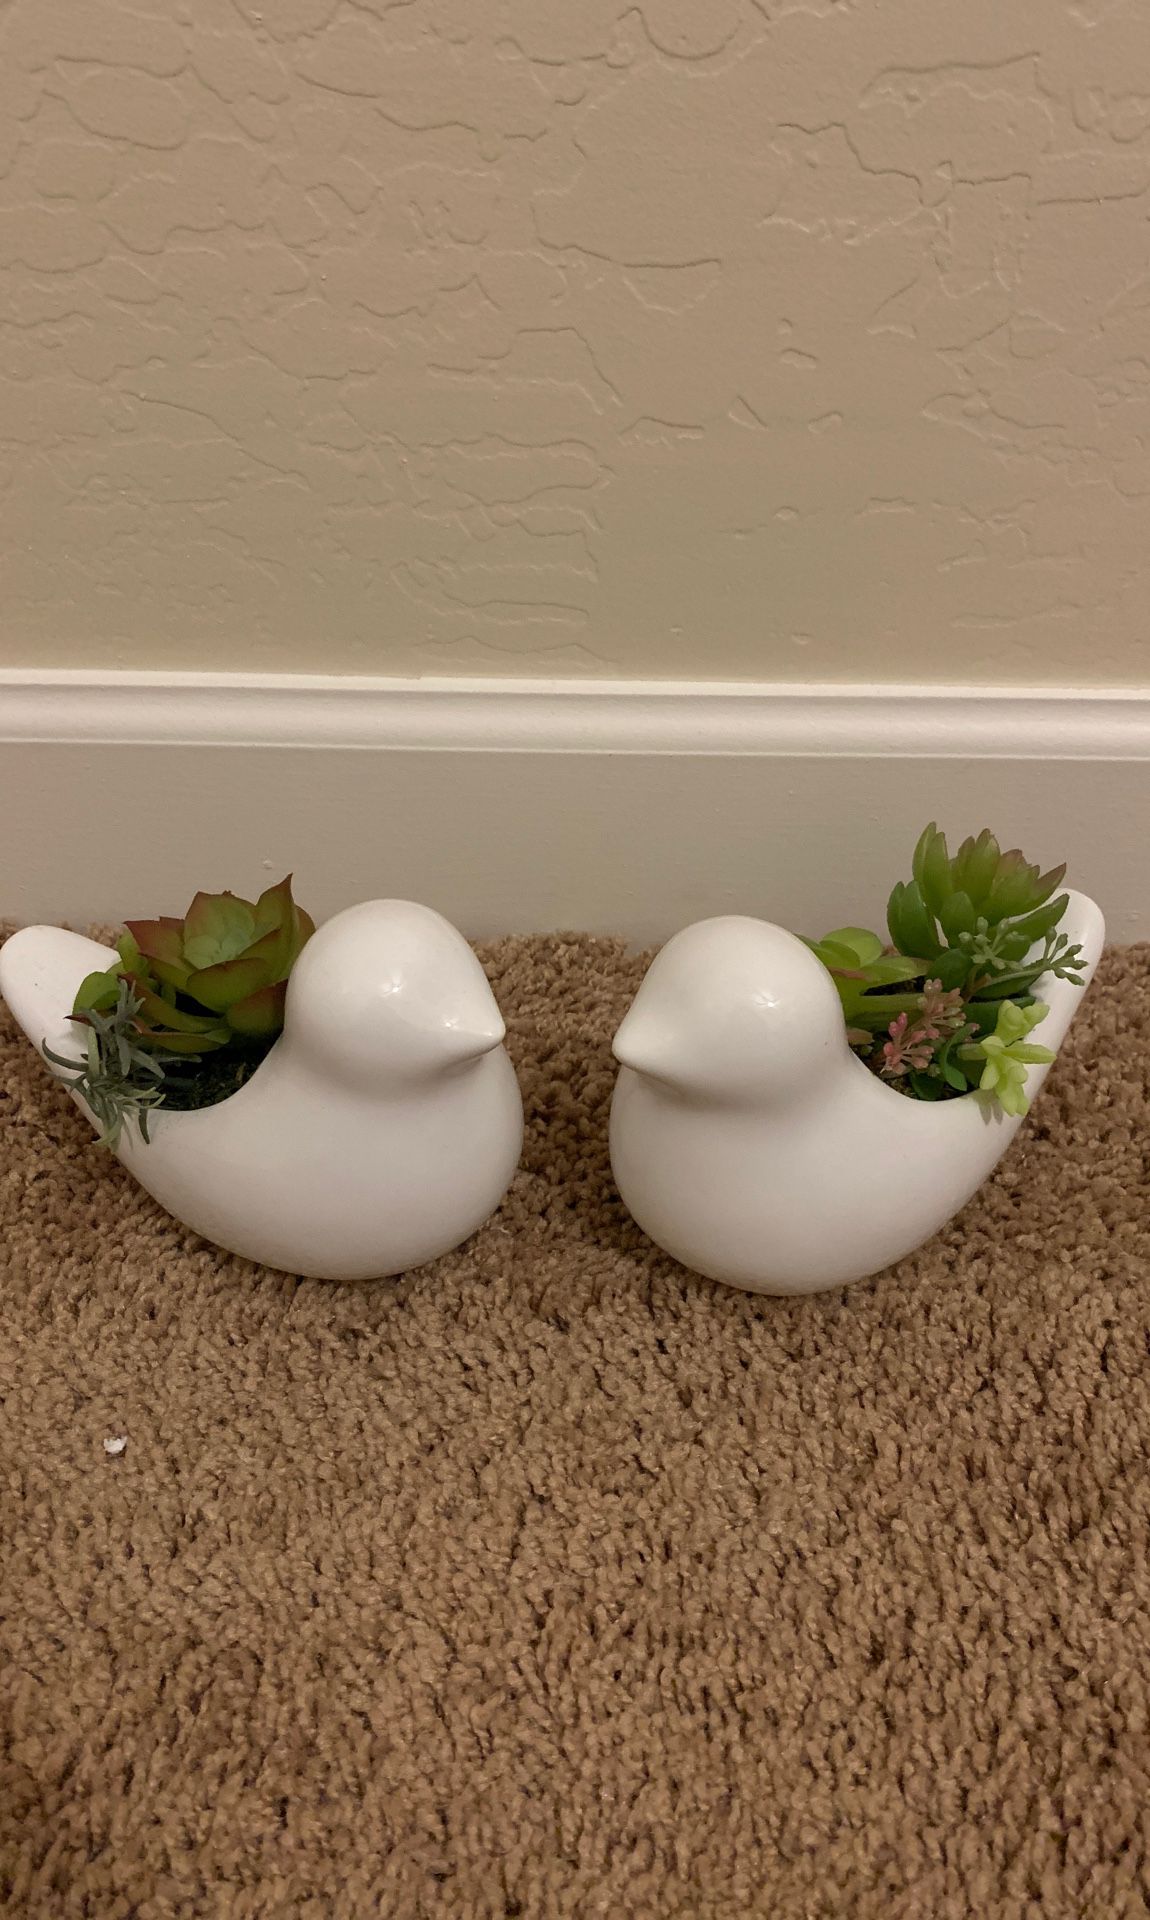 Porcelain birds with fake succulents